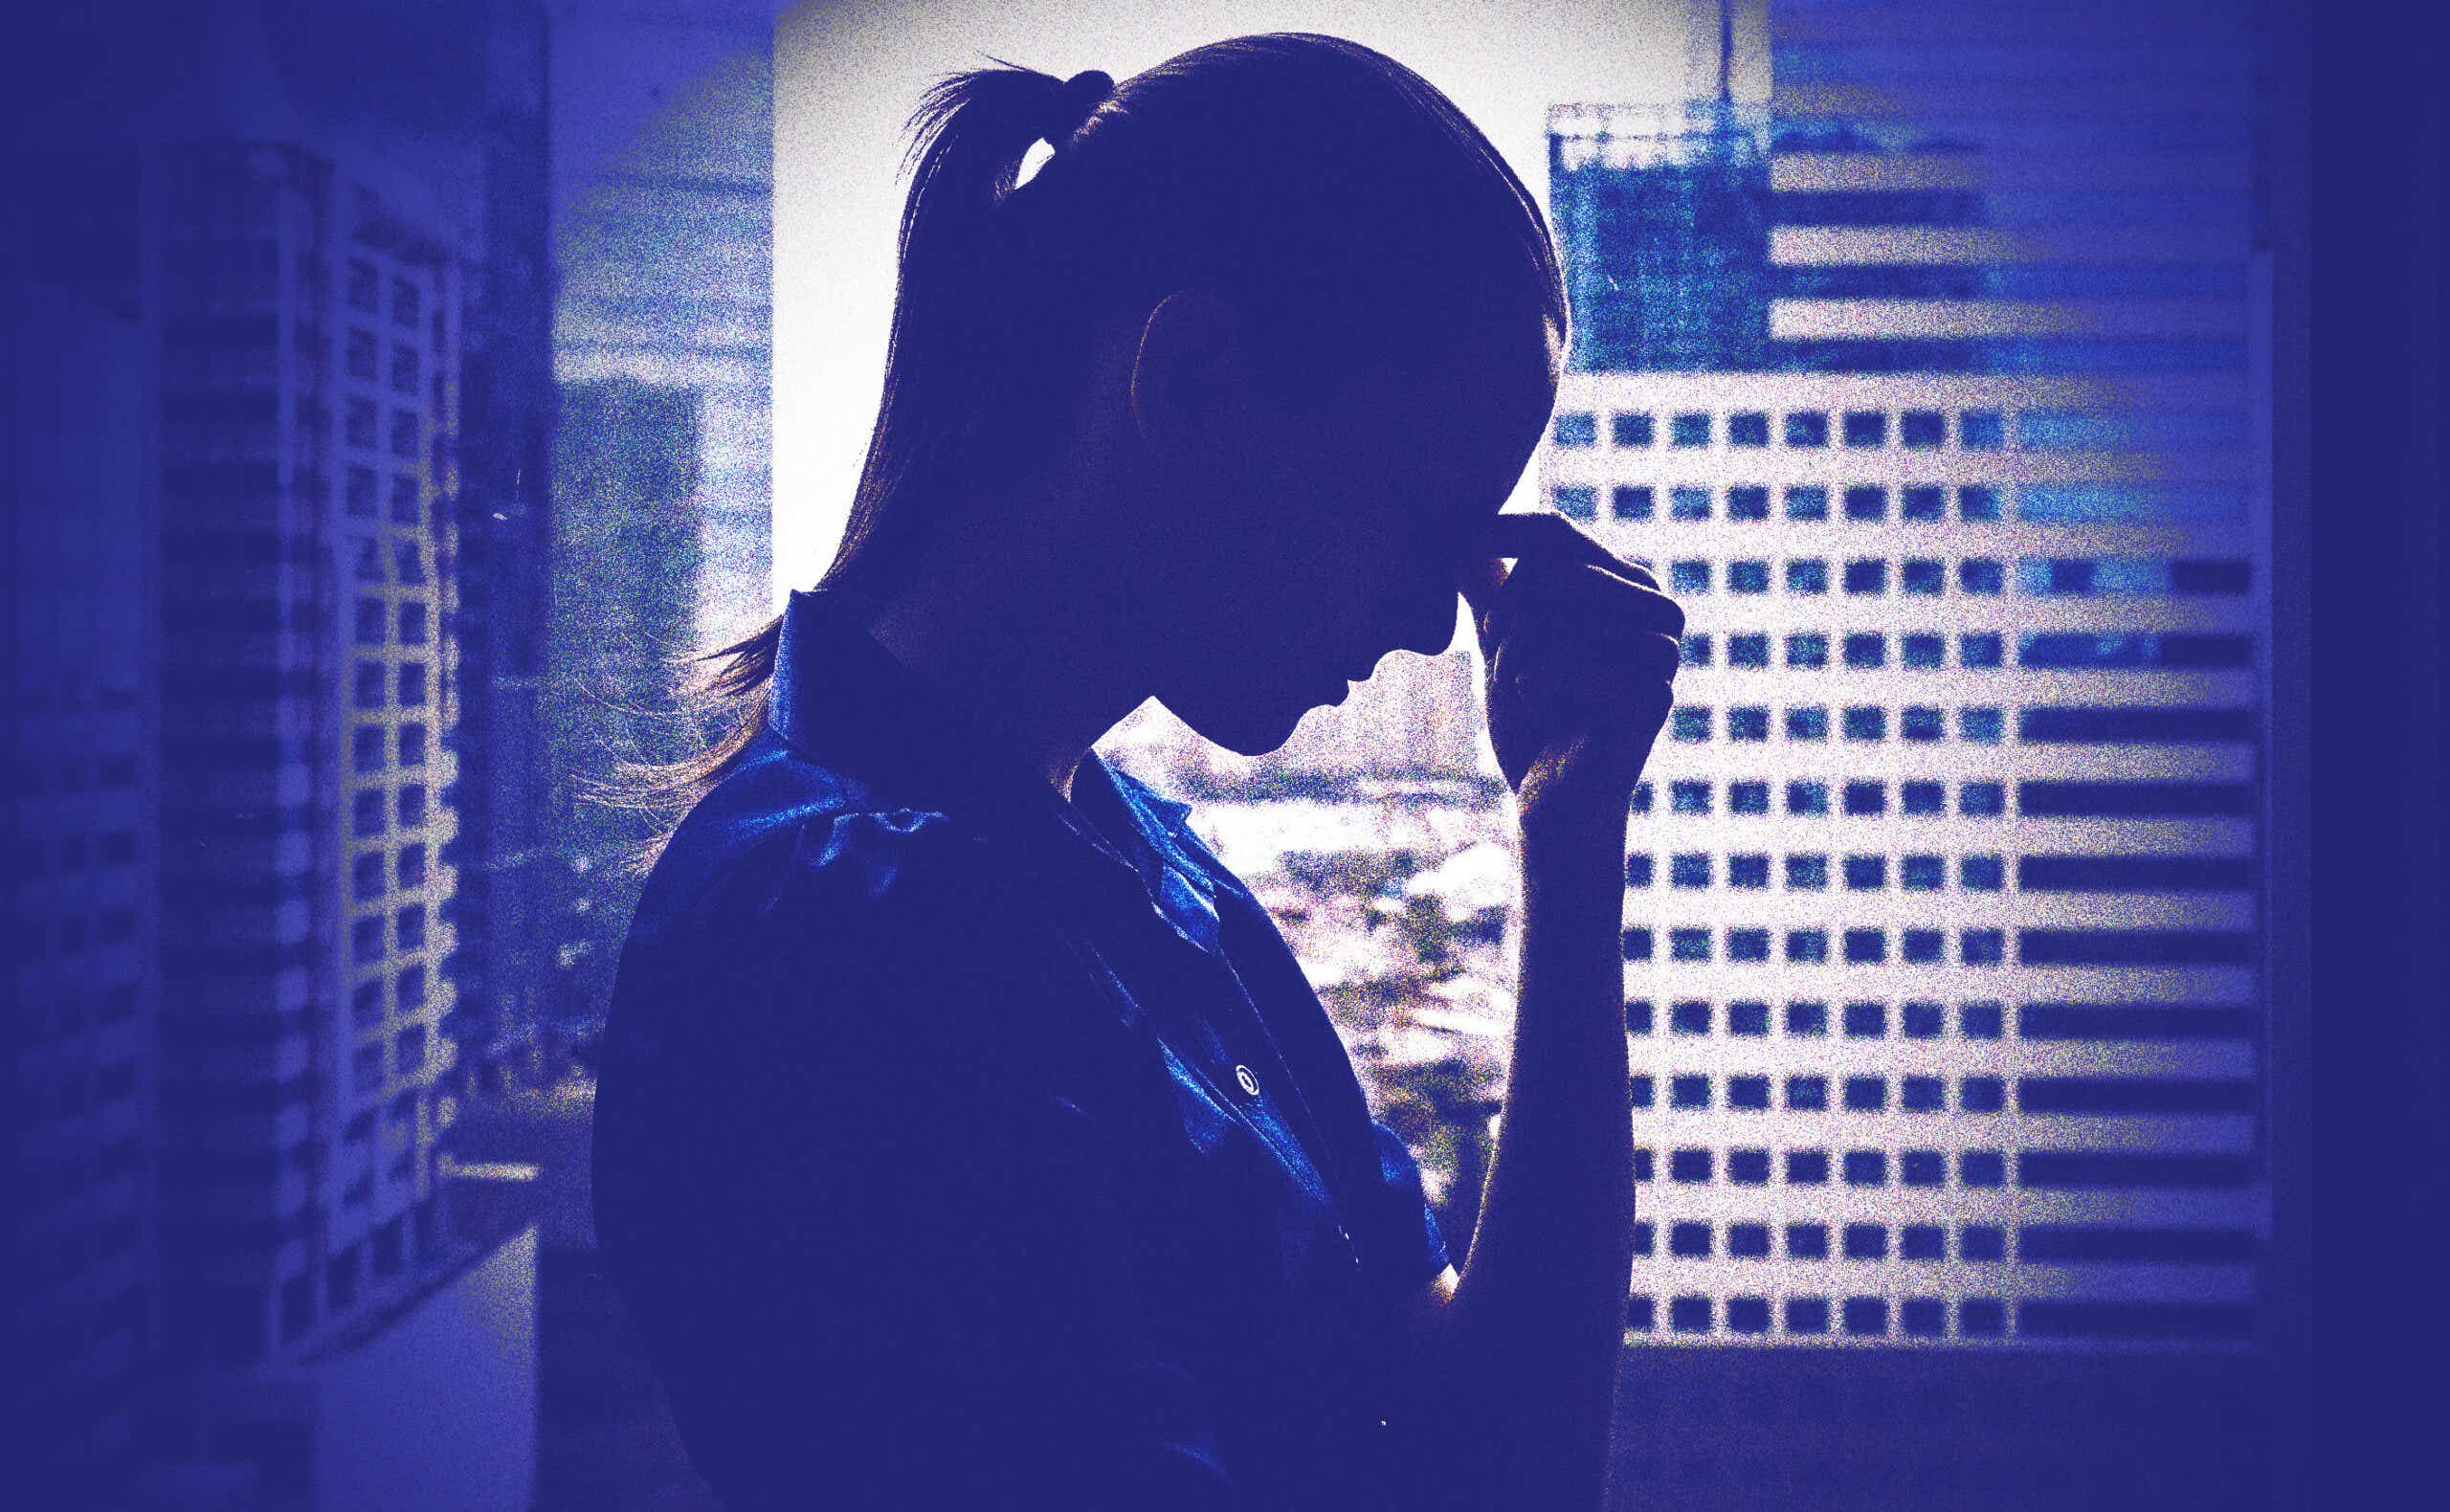 the silhouette of a woman looking distressed in an office